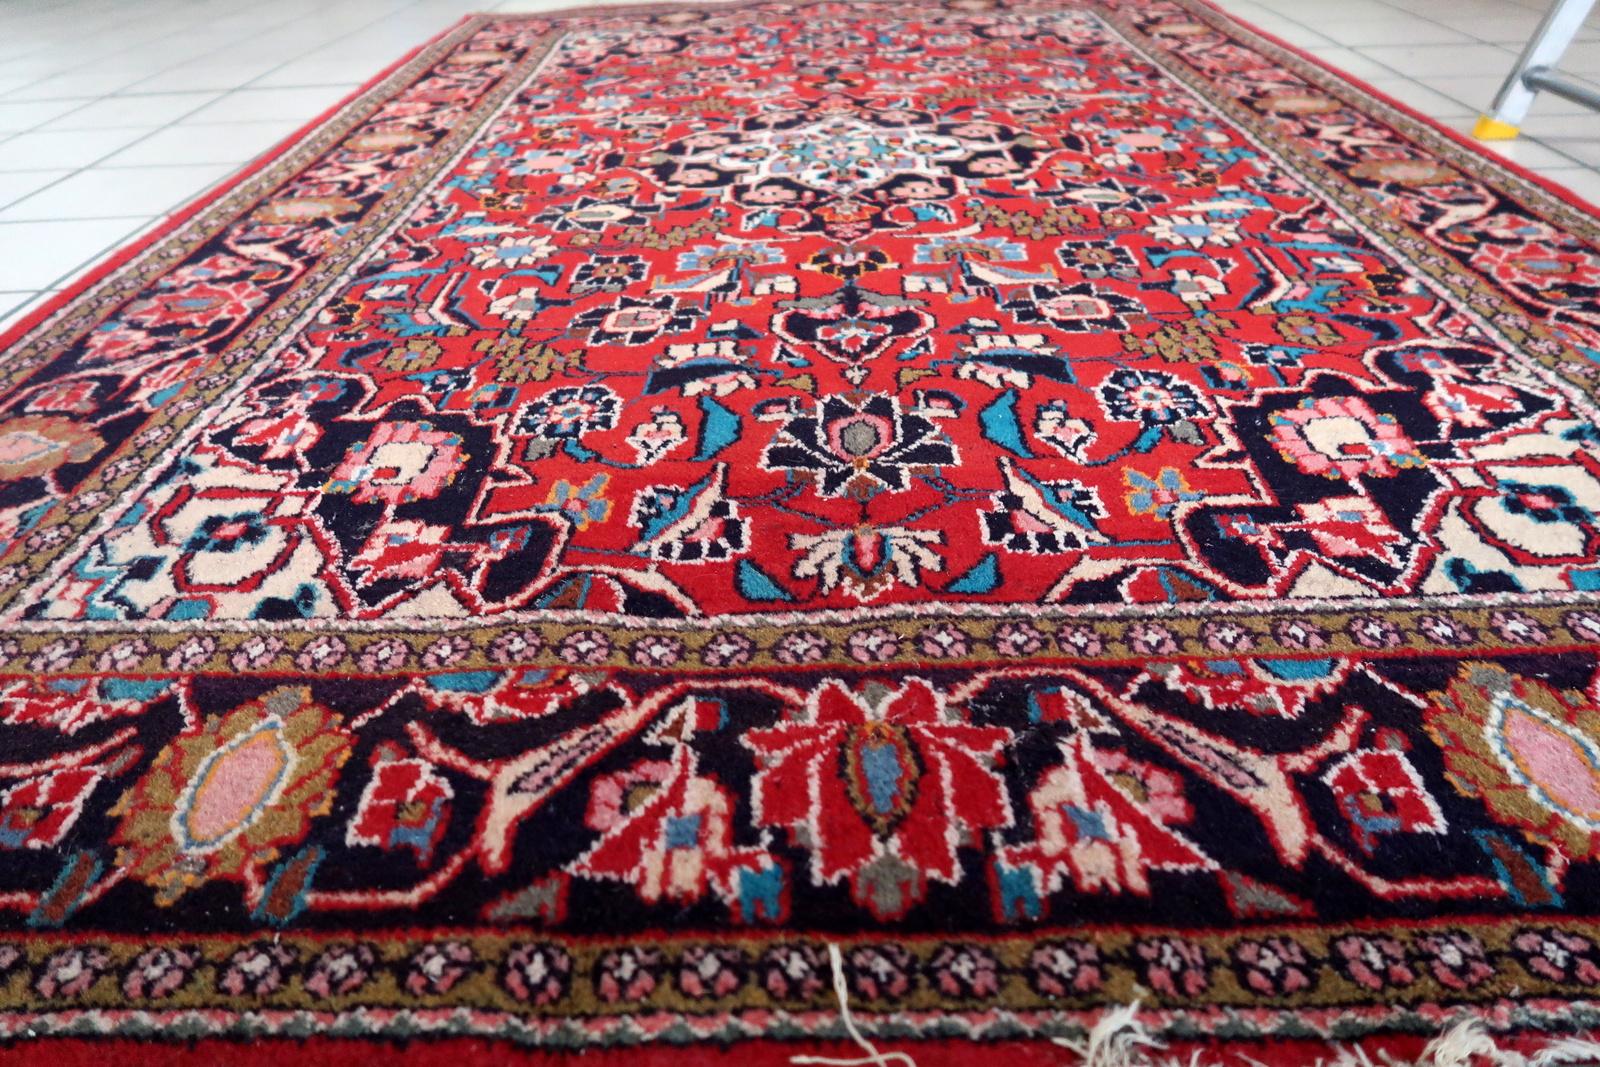 Handmade Antique Persian Style Kashan Rug 4.2' x 6.5', 1920s - 1C1119 For Sale 7